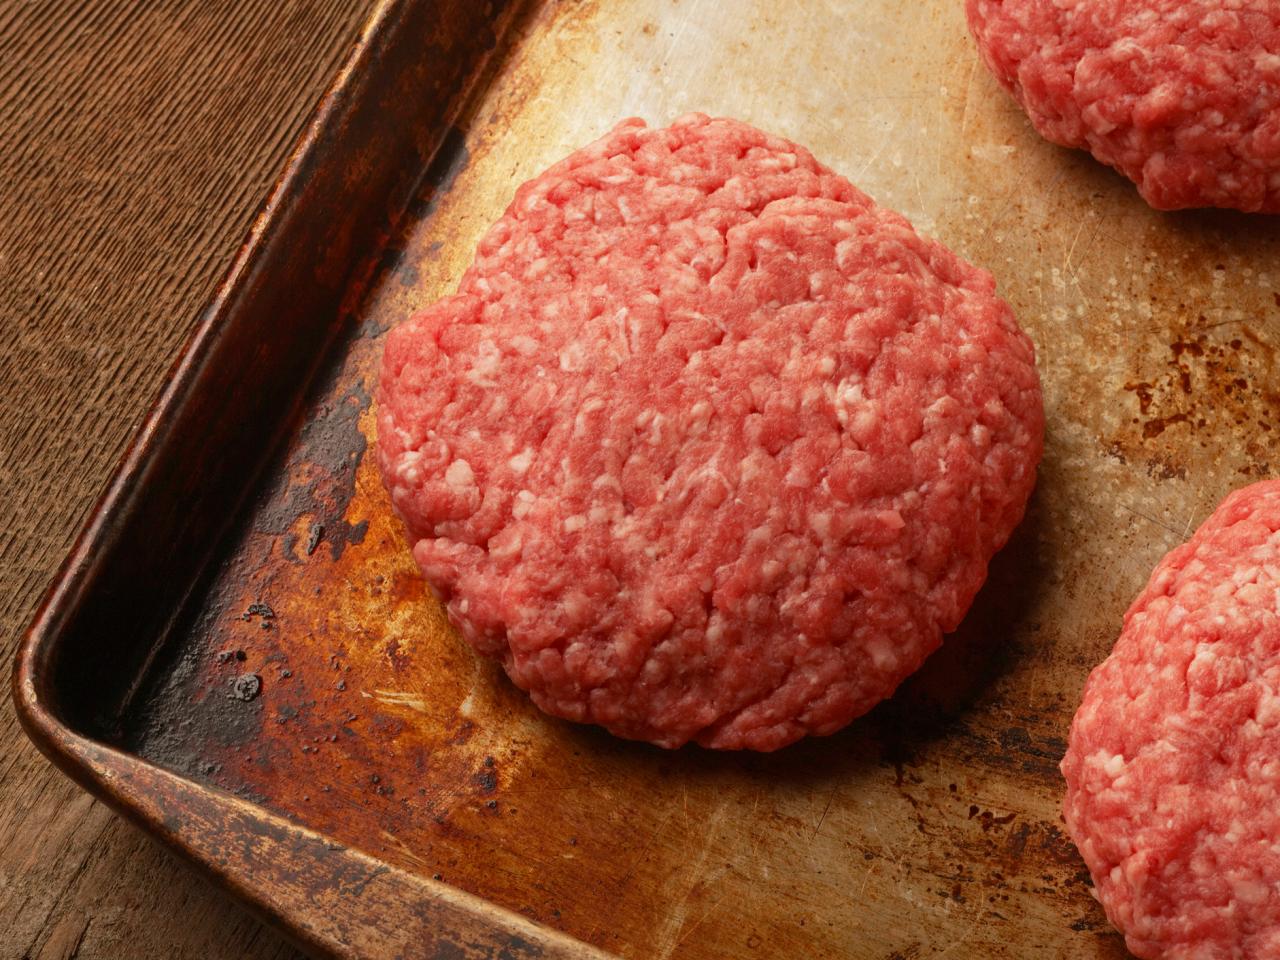 How to Tell if Ground Beef Is Bad